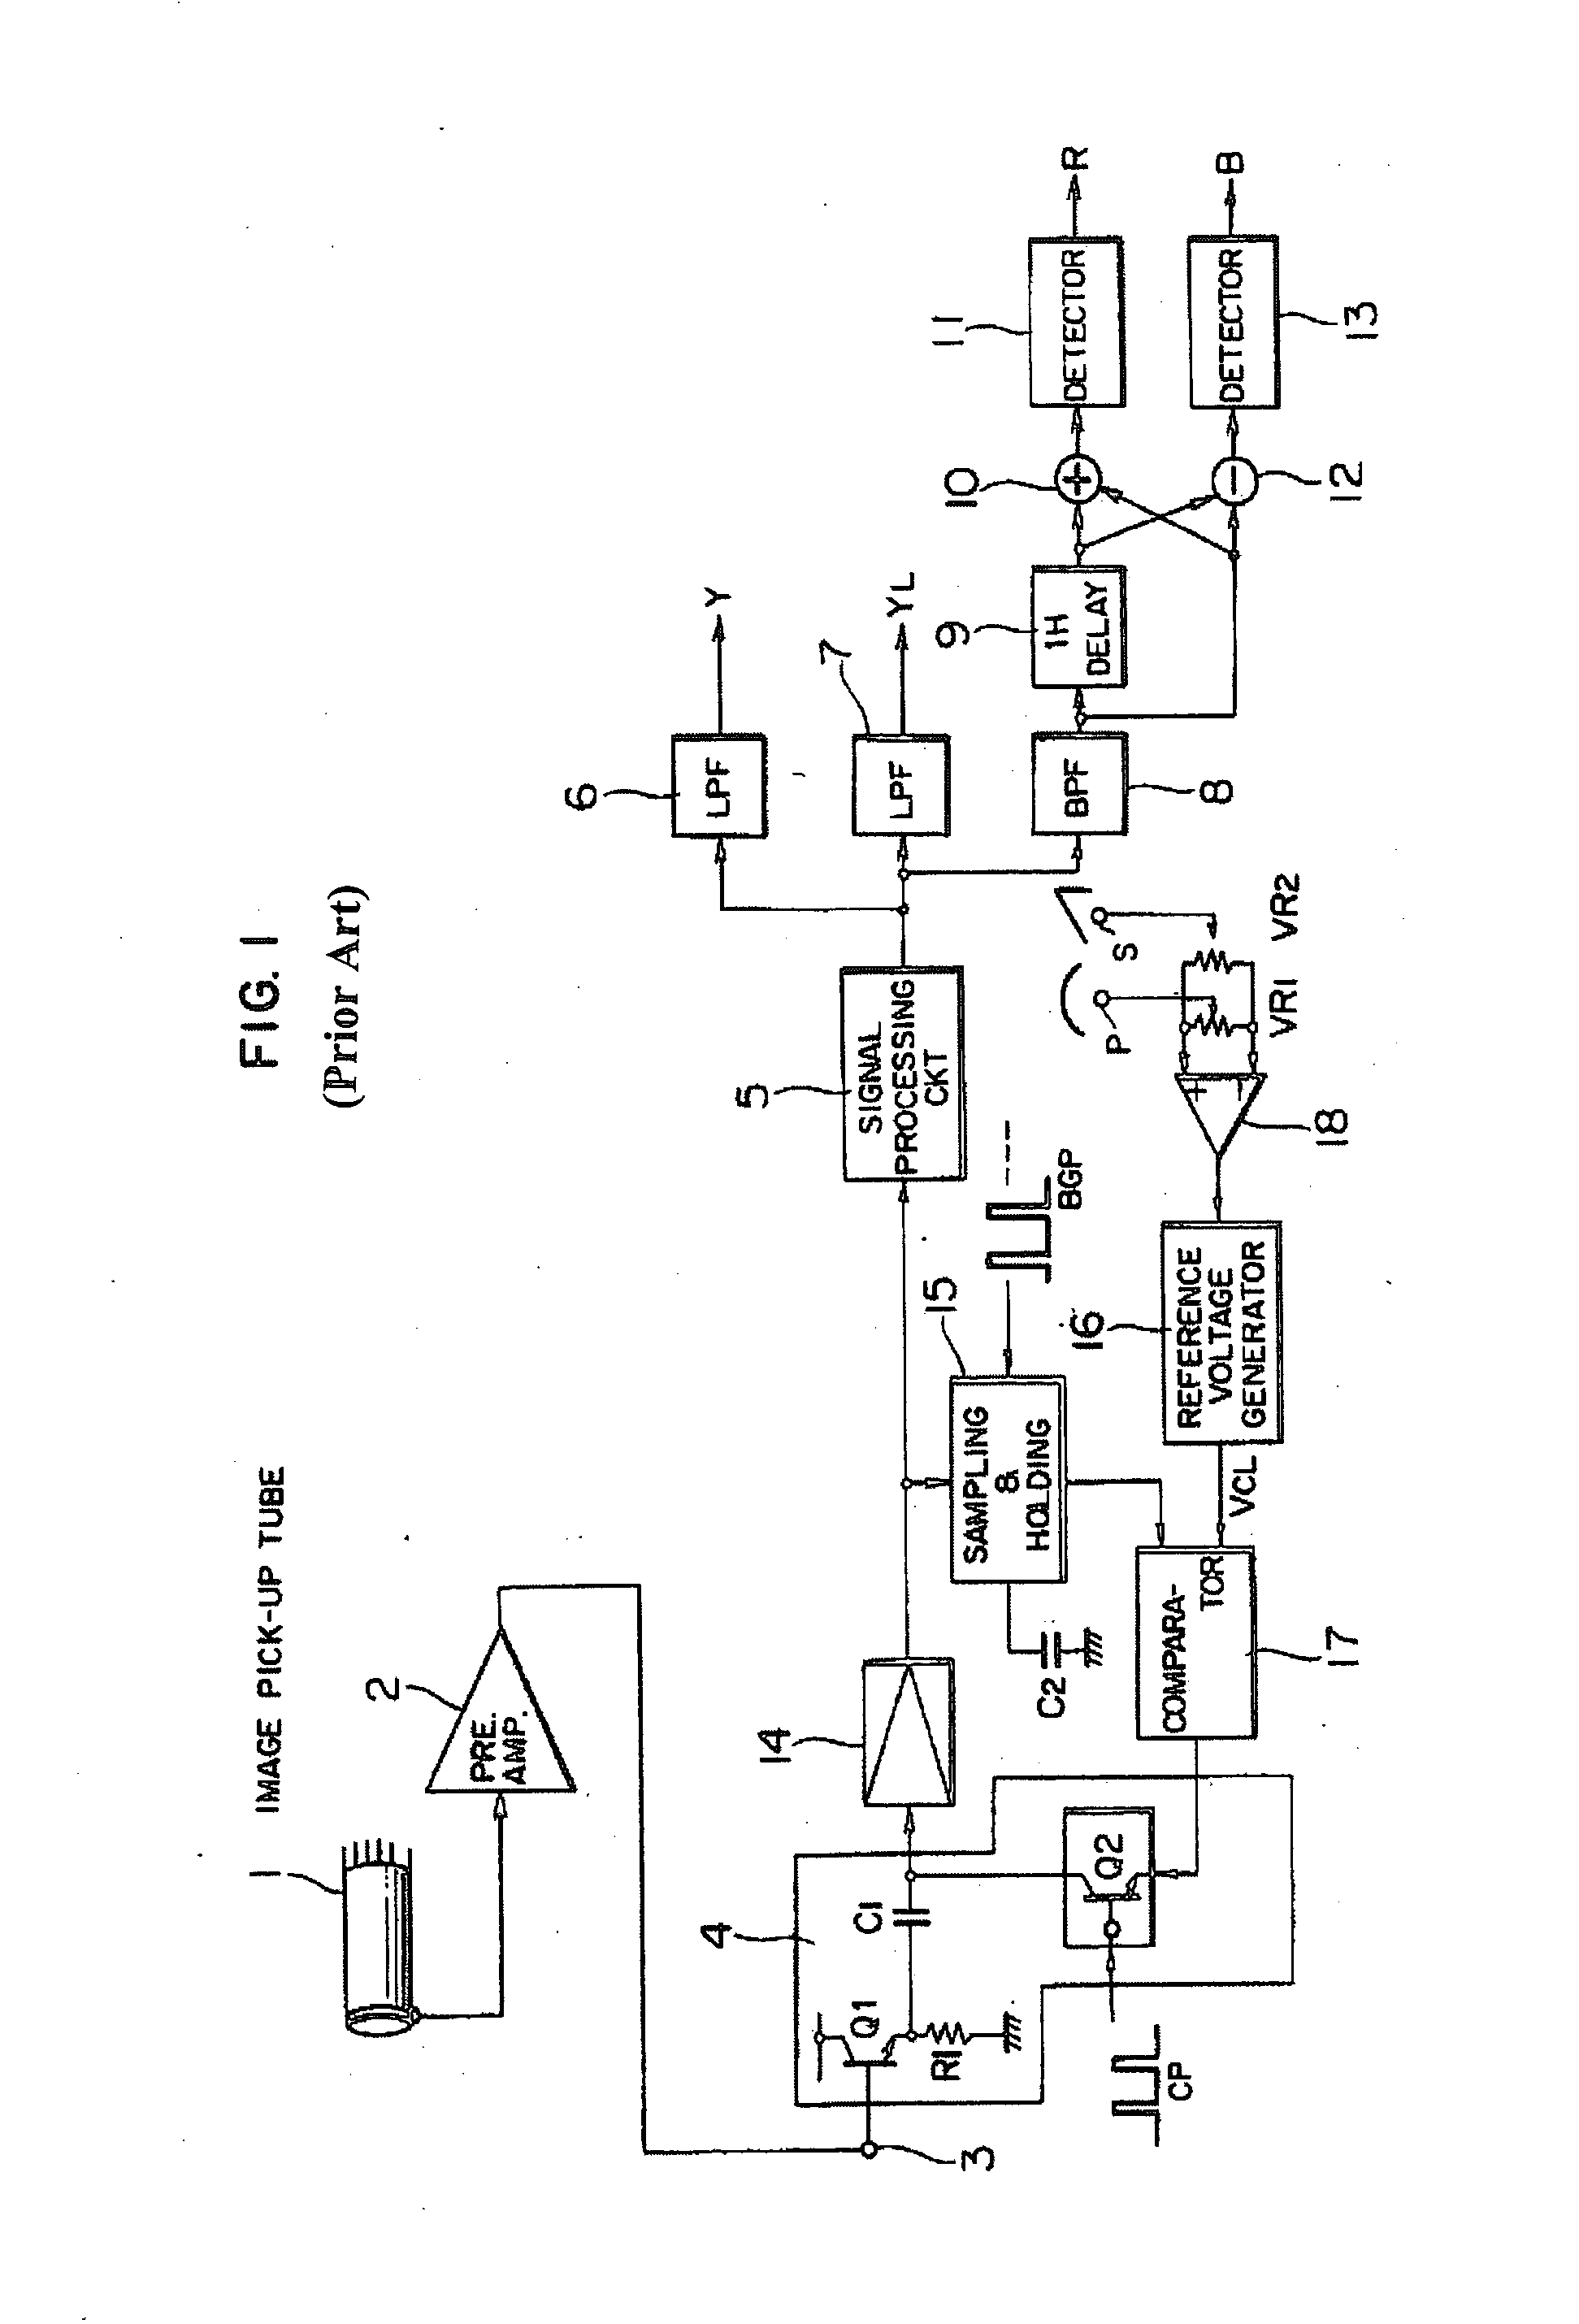 Cross-coupled differential Dac-based black clamp circuit